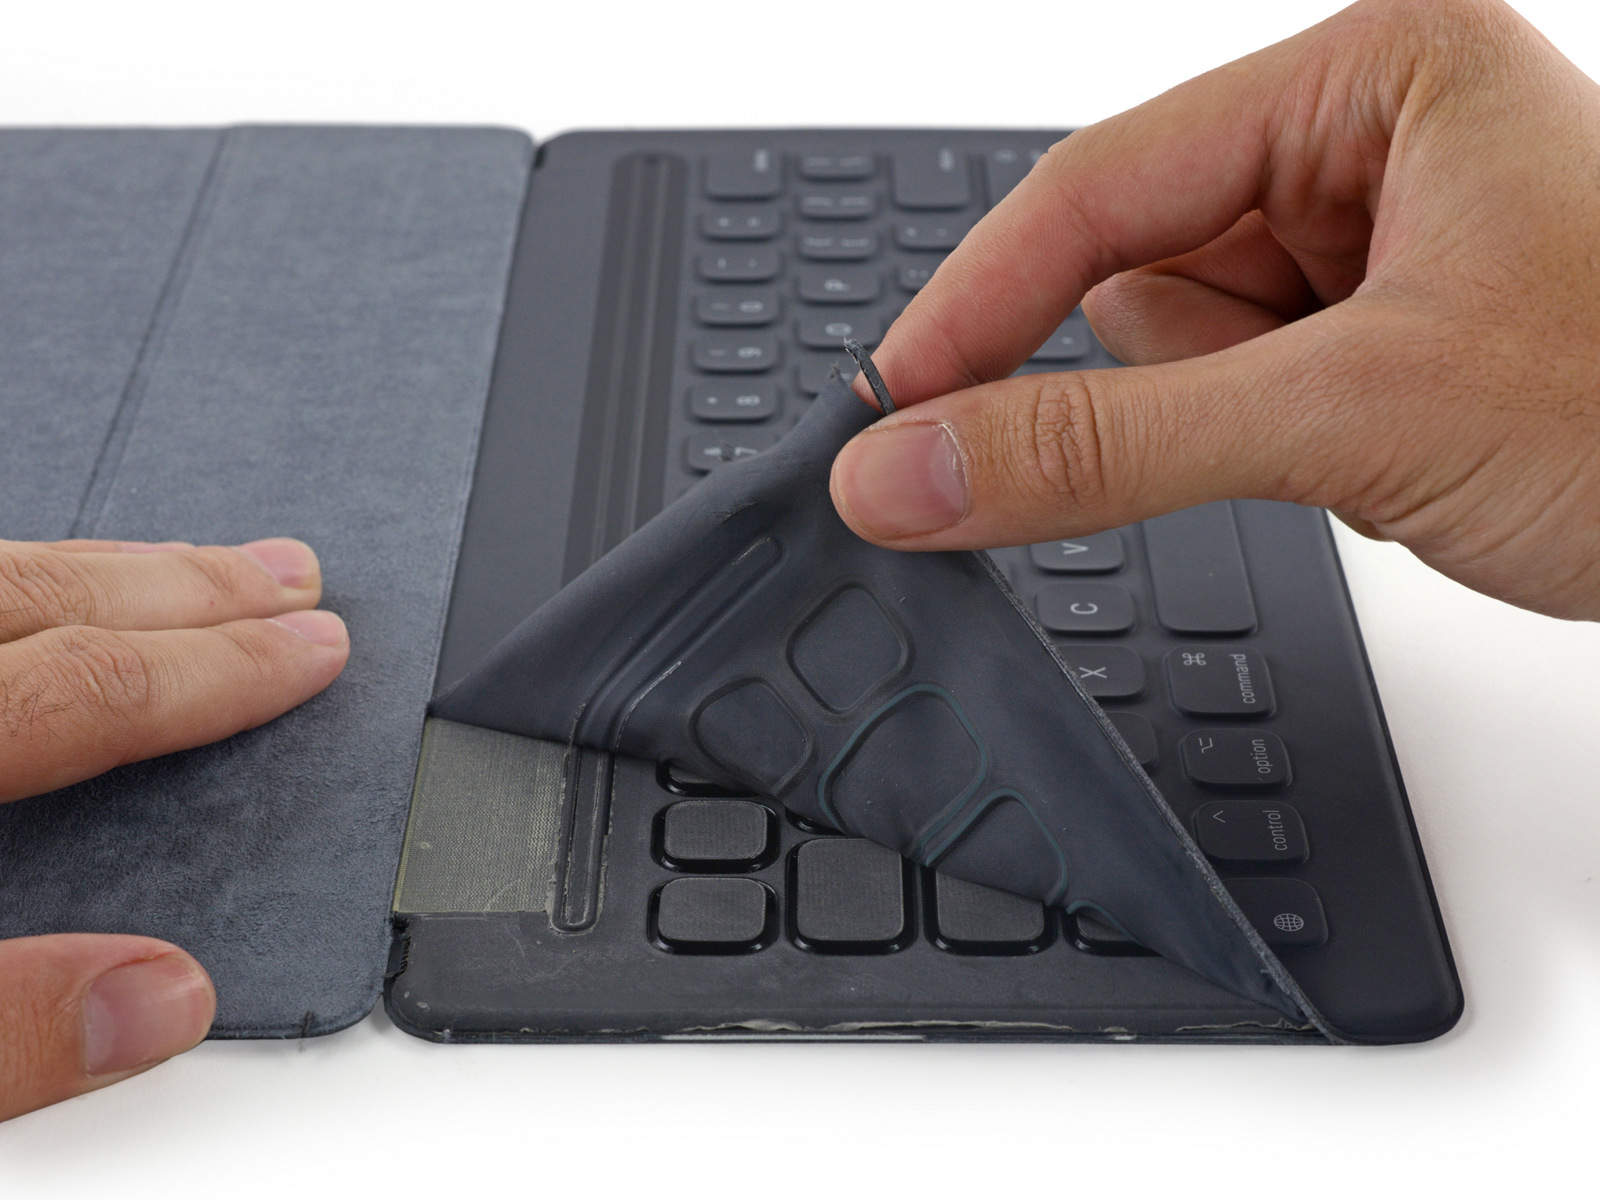 Apple's new keyboard is made out of high-tech fabric.